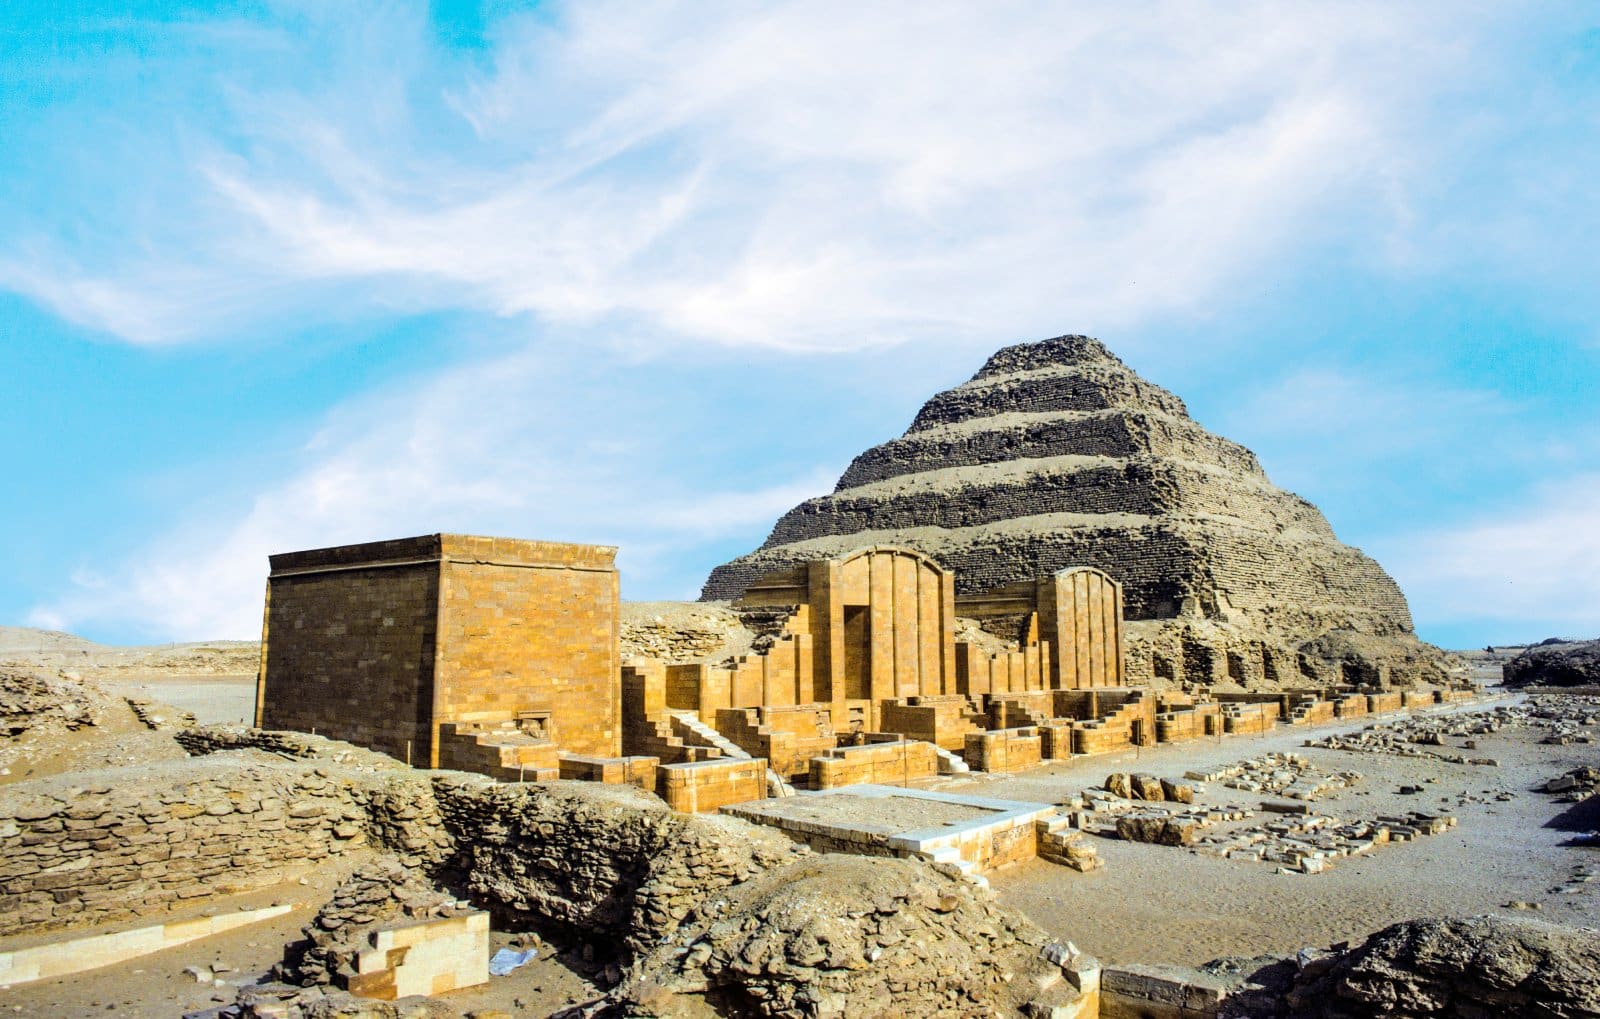 <p class="wp-caption-text">Image Credit: Shutterstock / travelview</p>  <p><span>Saqqara, located just south of Cairo, is one of Egypt’s most significant archaeological sites, serving as the necropolis for the ancient capital of Memphis. The site is home to the Step Pyramid of Djoser, the world’s oldest complete stone building complex, marking a revolutionary architectural design advance. Saqqara’s broad expanse contains countless tombs and burial sites, offering insights into ancient Egyptian mortuary practices and beliefs. The site’s importance lies in its architectural innovations and the wealth of art, hieroglyphs, and artifacts that provide a detailed record of life and death in ancient Egypt.</span> </p>